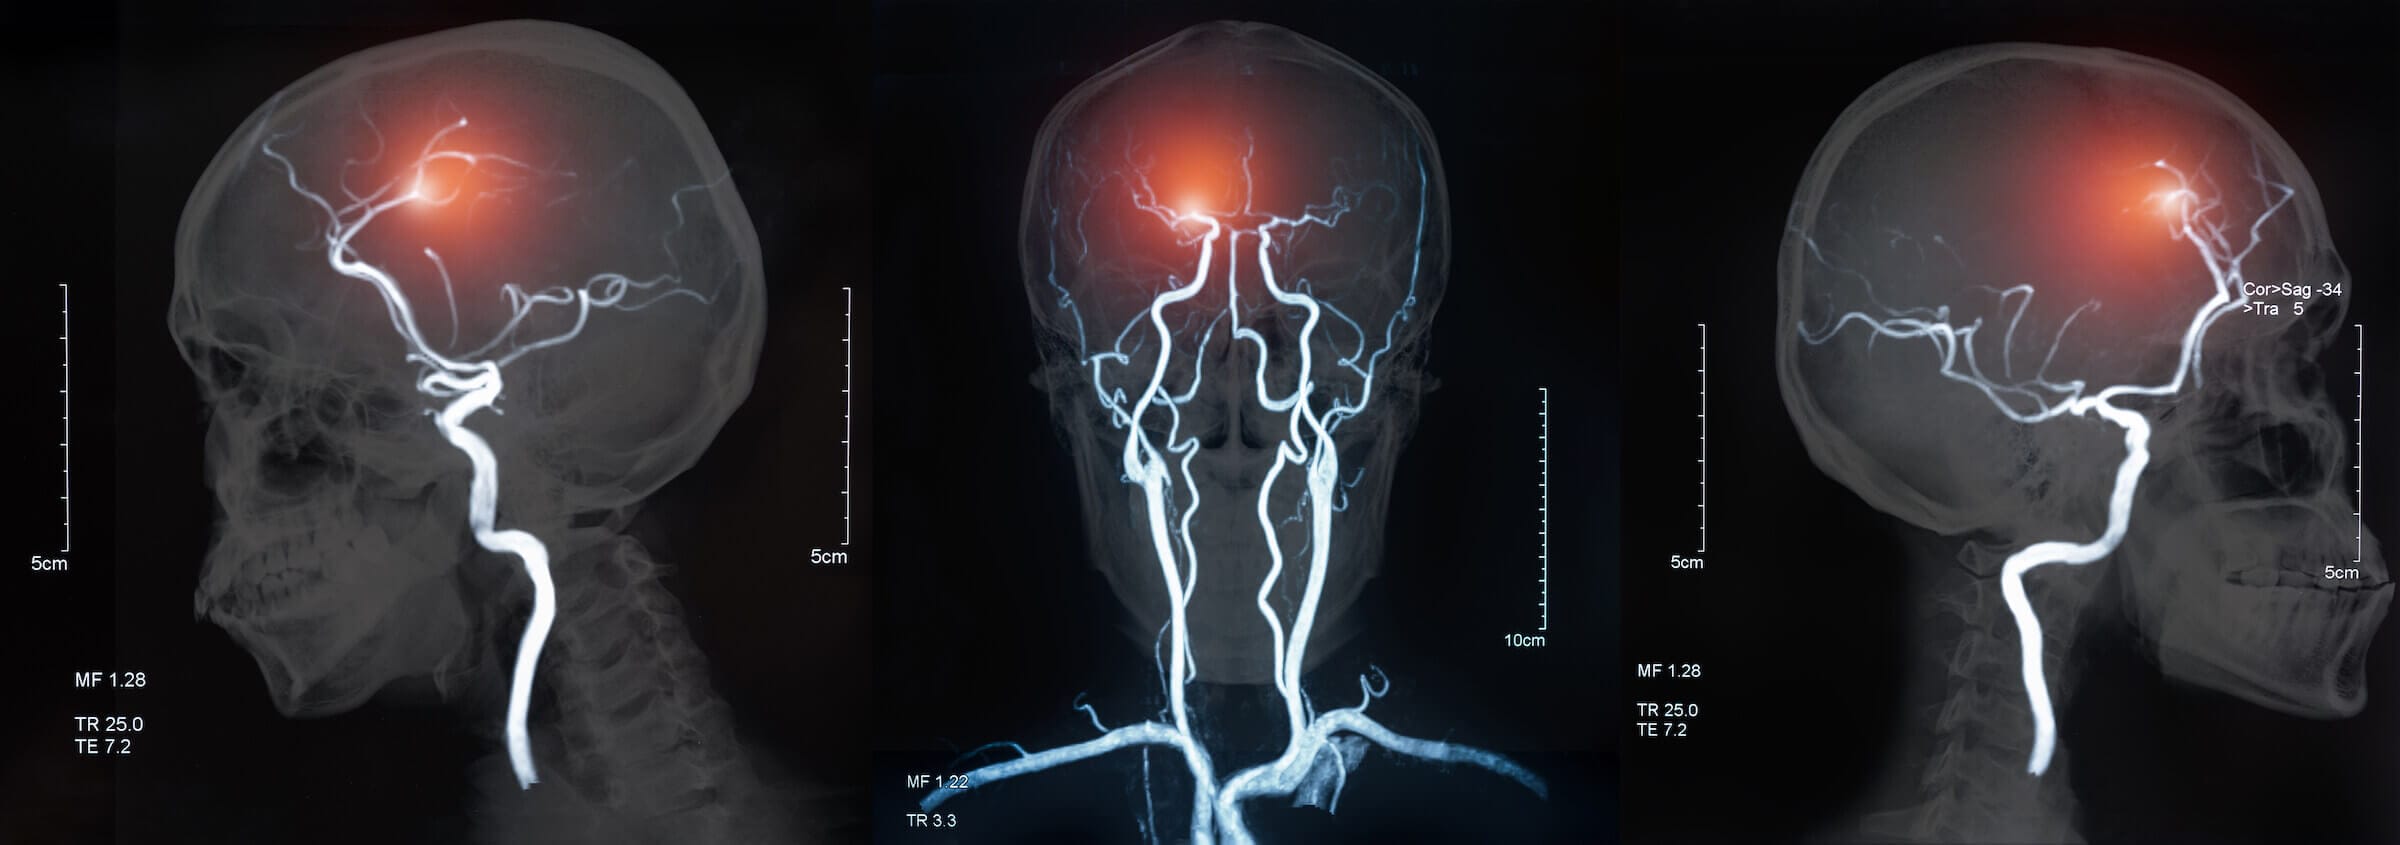 A stroke occurs when the blood supply to part of your brain is interrupted or reduced, preventing brain tissue from getting oxygen and nutrients.